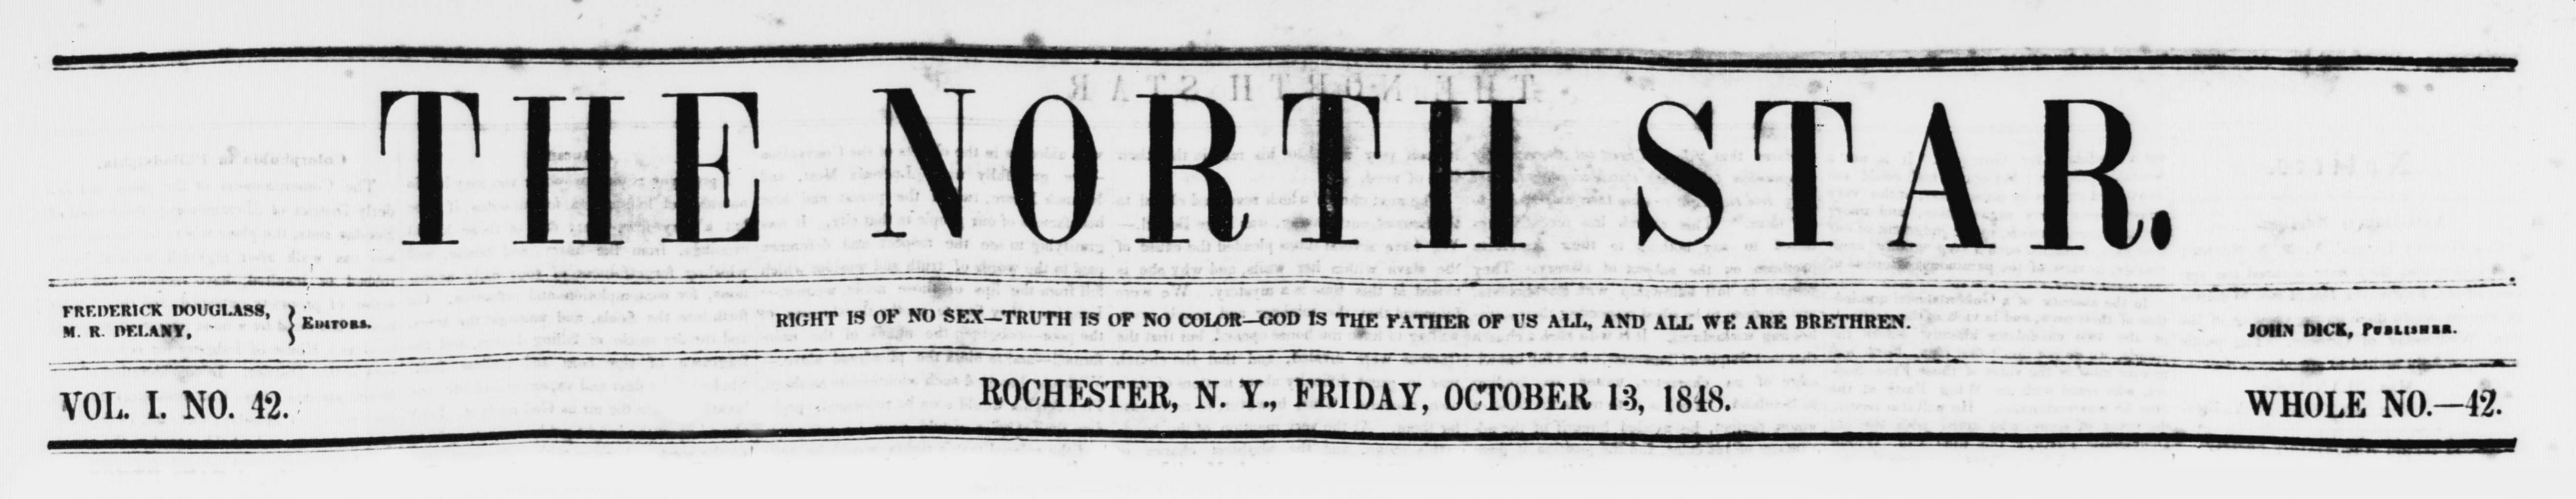 Masthead of The North Star, dated October 13, 1848.